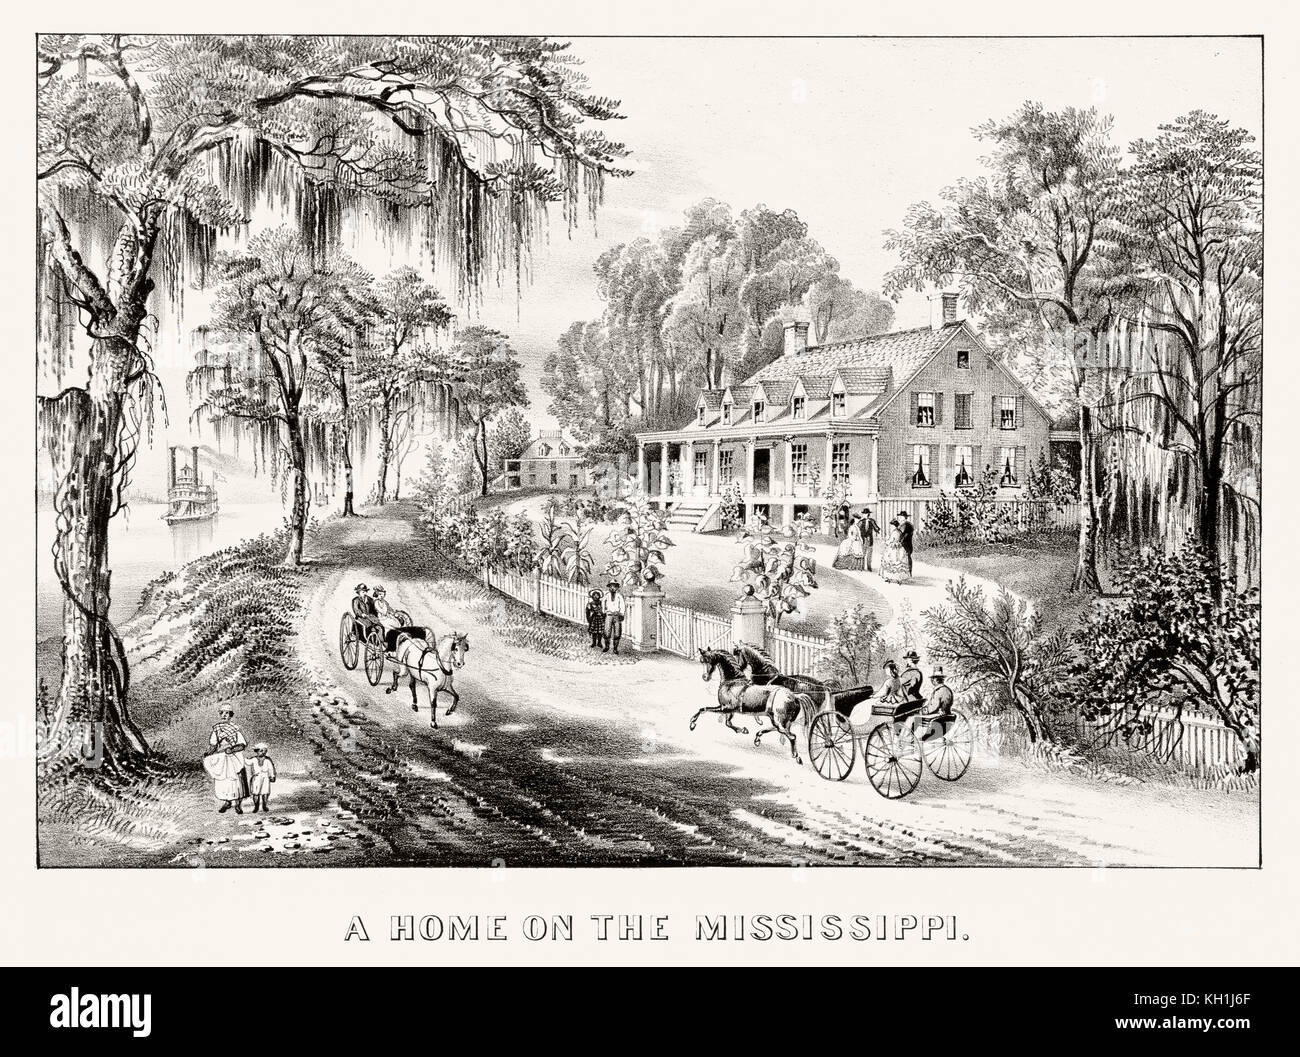 Old illustration of an home on the bank of Mississippi river, U.S.. By Currier & Ives, publ. in New York, 1871 Stock Photo